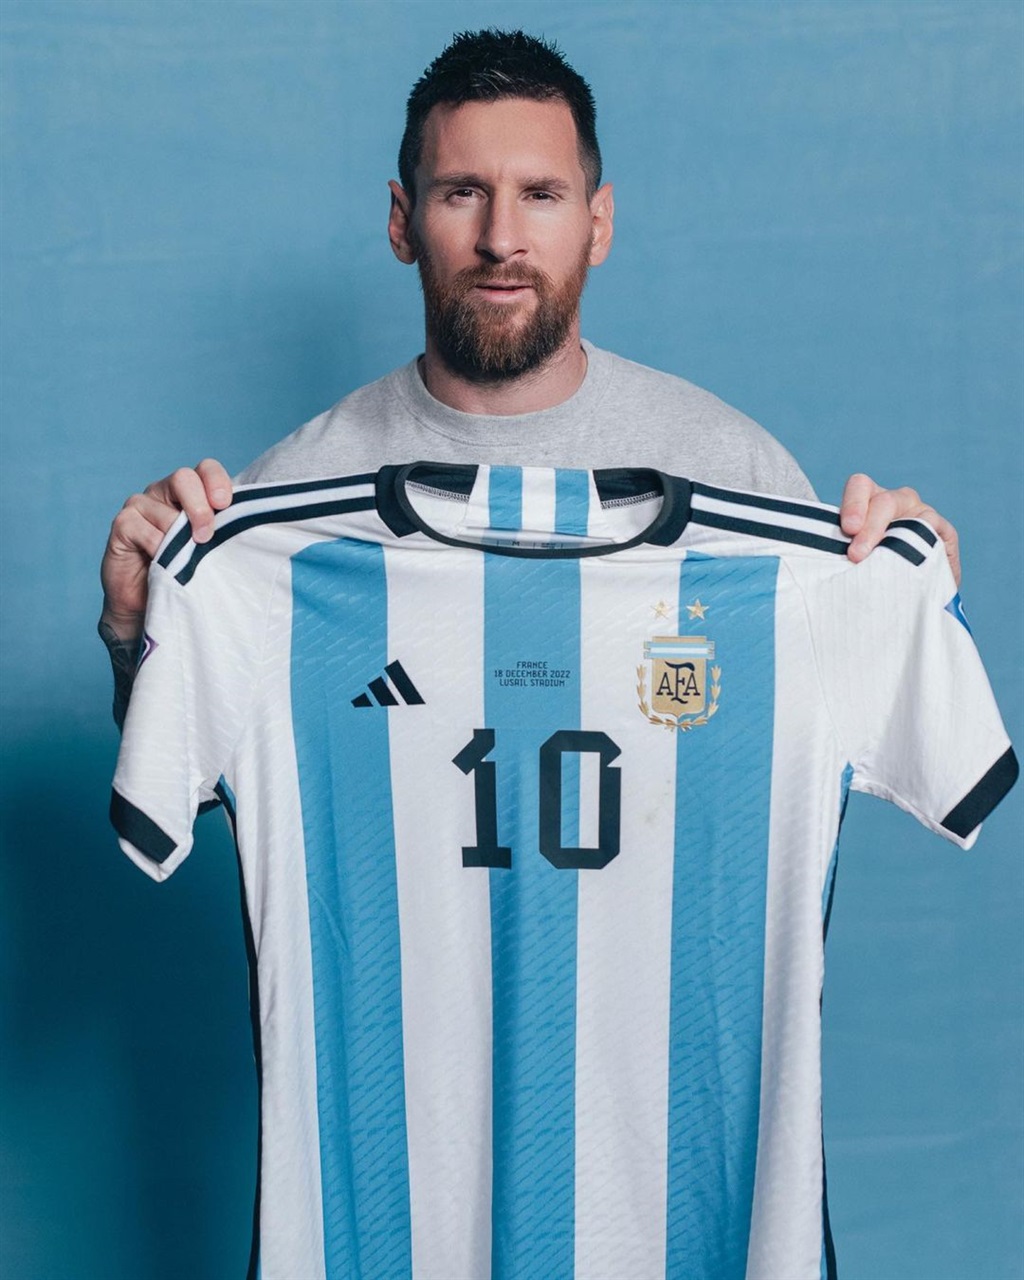 Lionel Messi's World Cup match jerseys are reporte